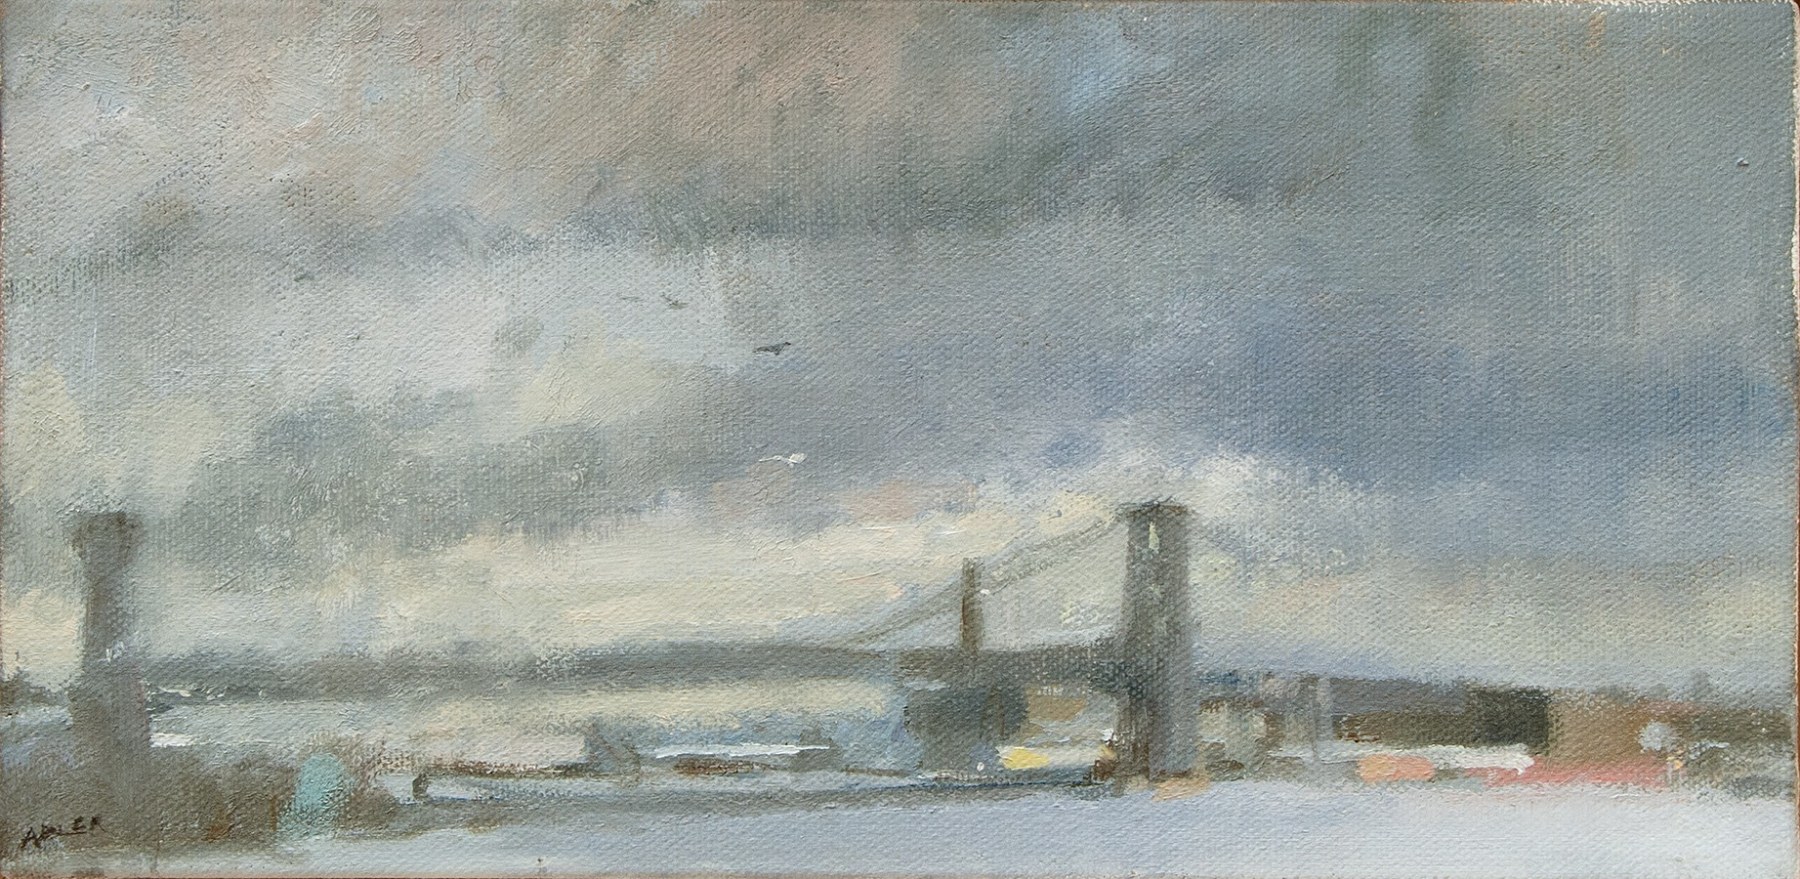 Laura Adler Storm Approaching East River, 2011 oil on canvas 5 7/8 x 12 in.